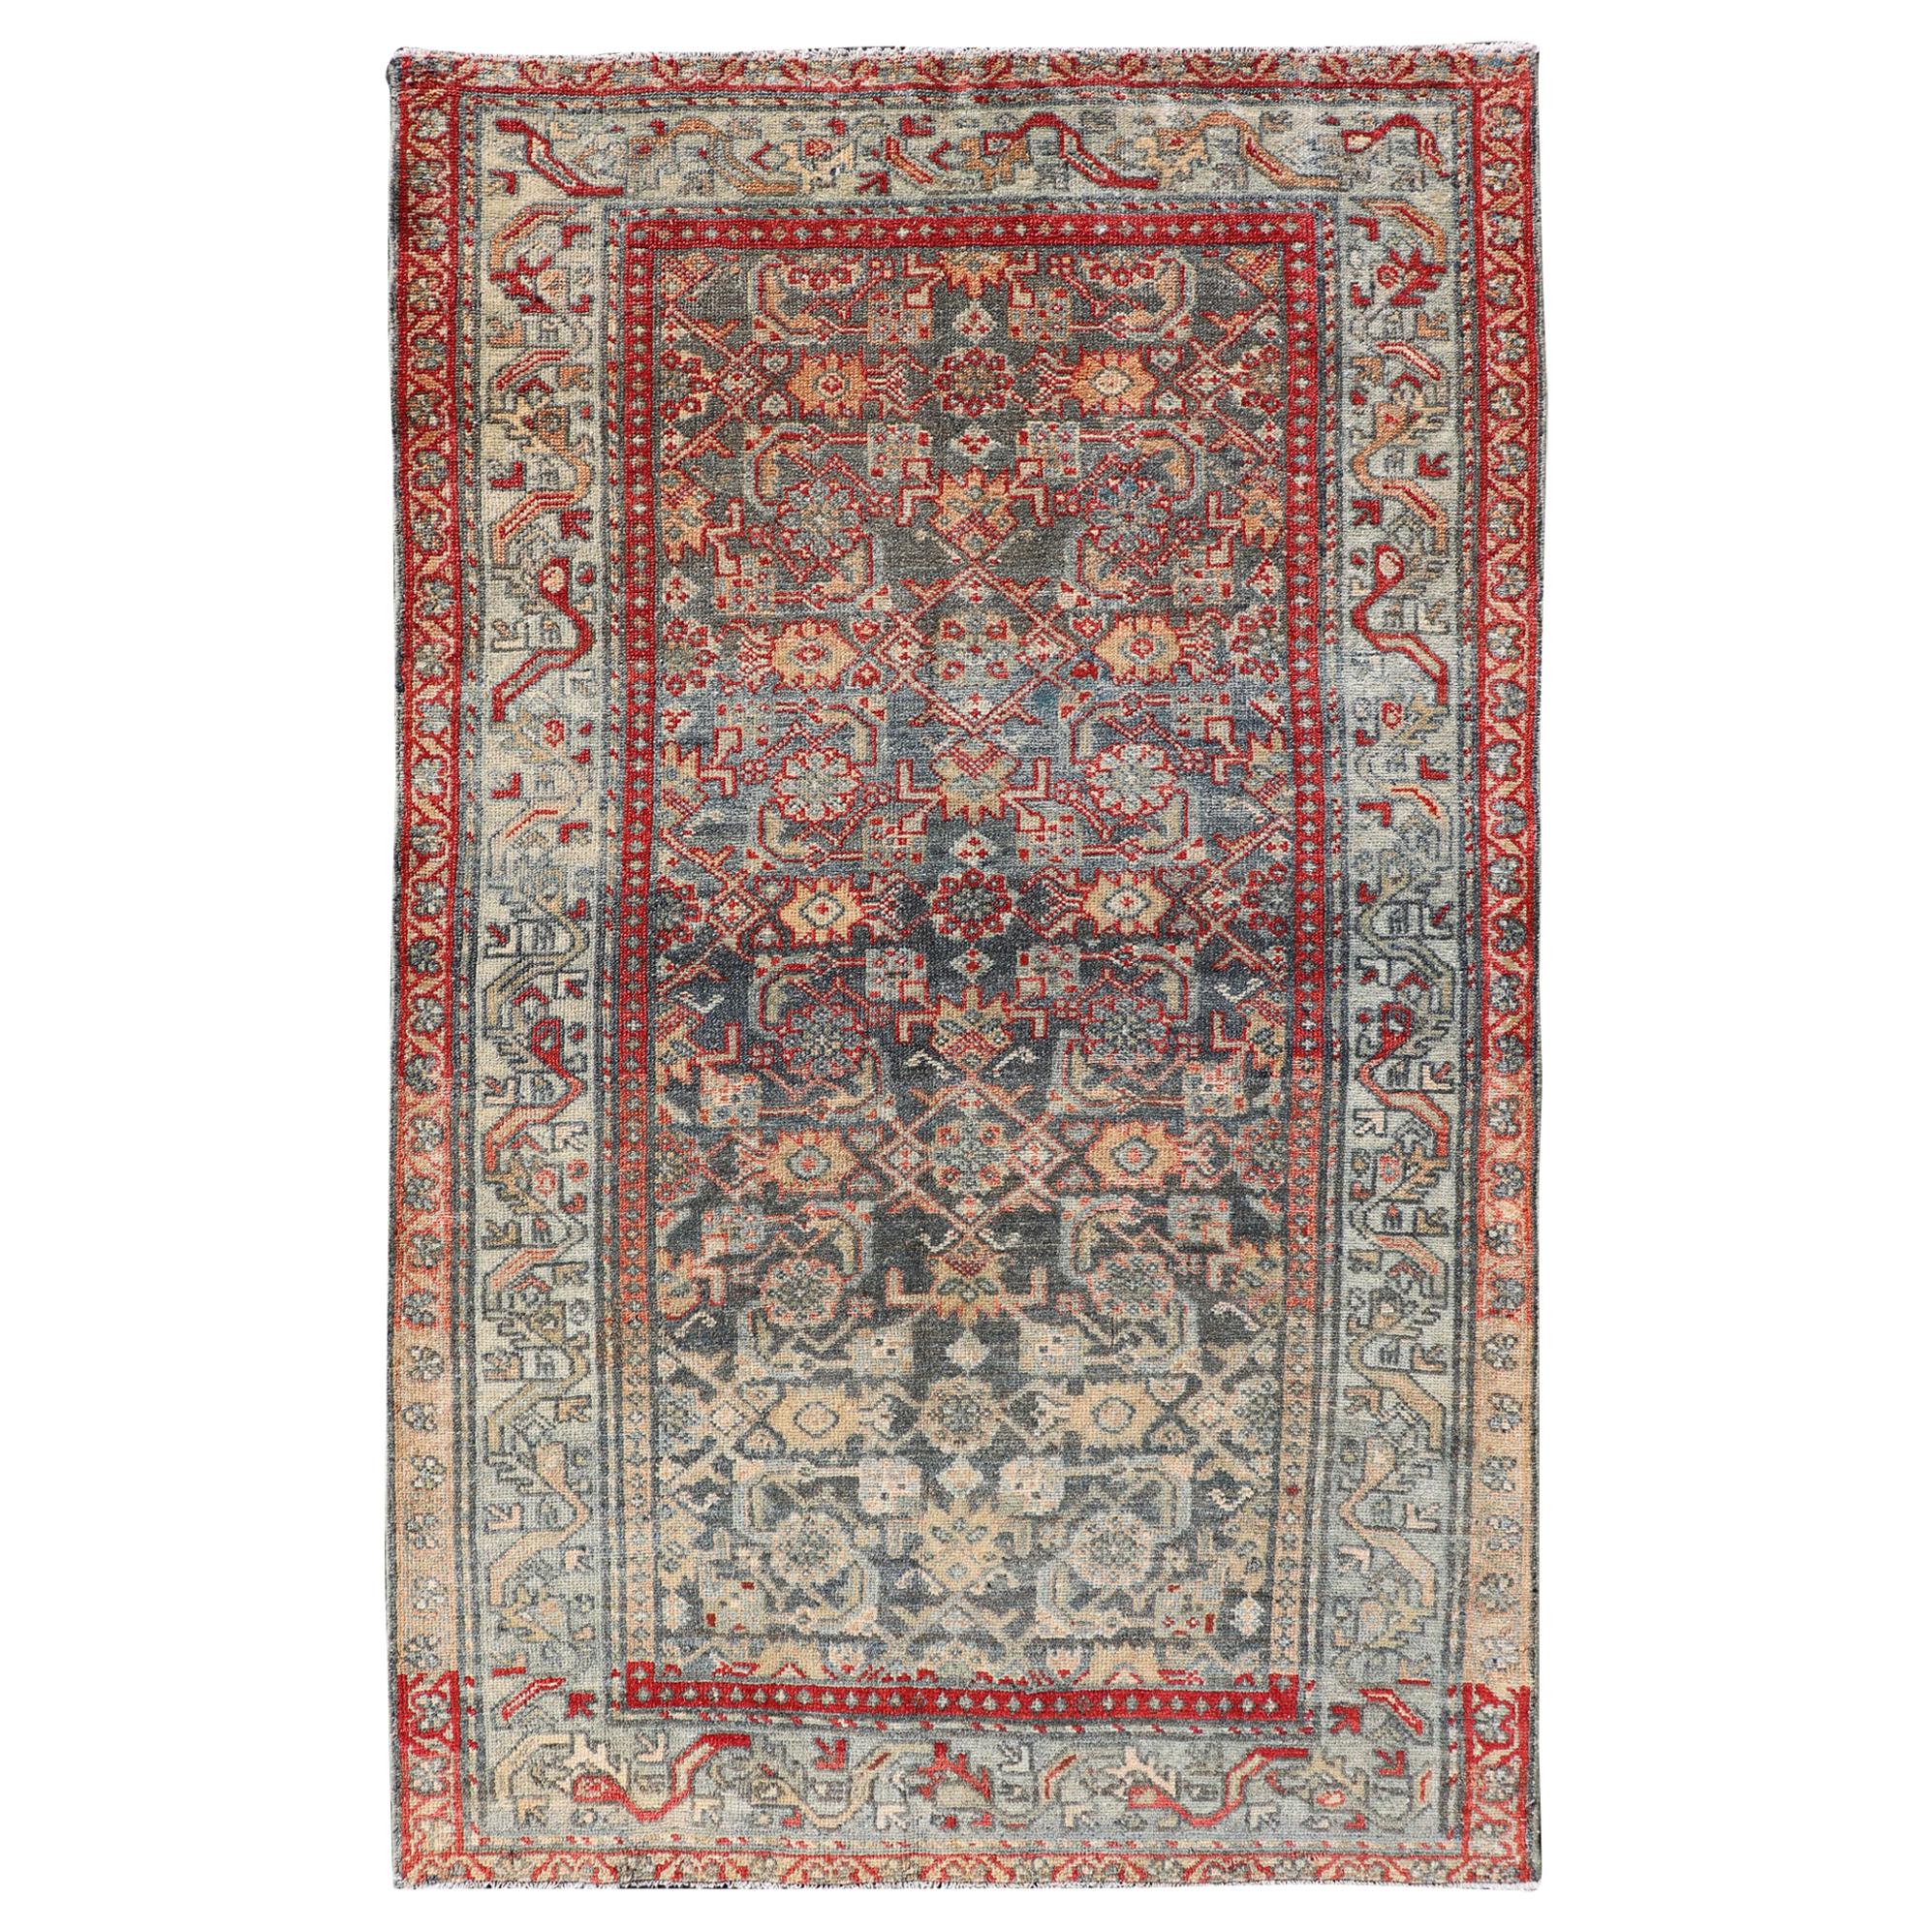 Antique Persian Malayer Rug with Colorful All-Over Geometric Design